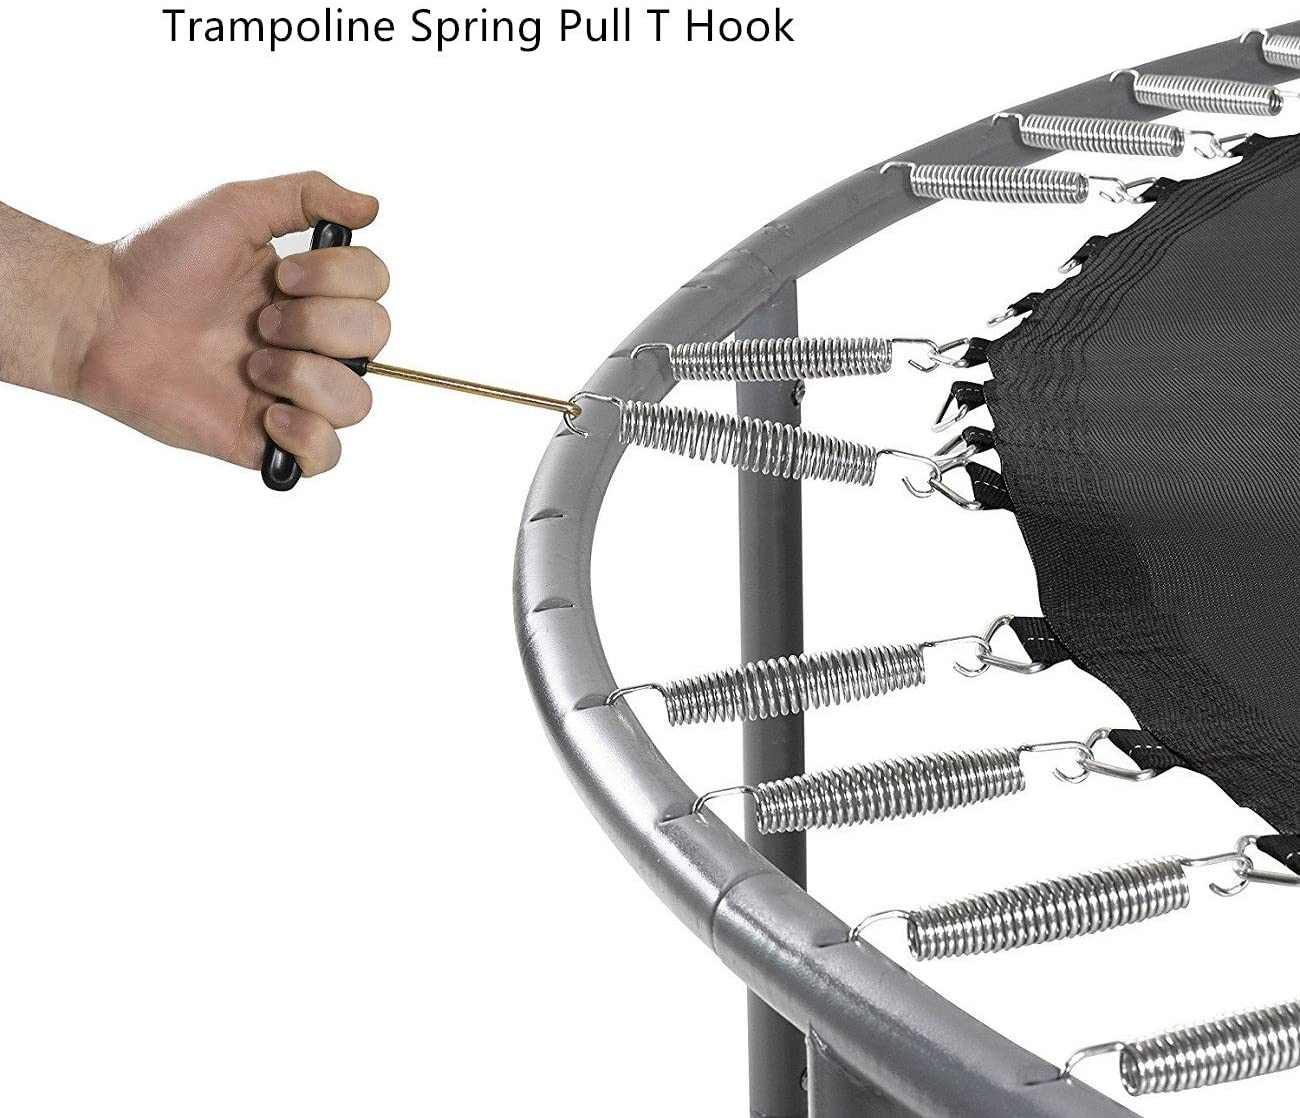 Trampoline Spring Pull Tool (T-Hook) Review